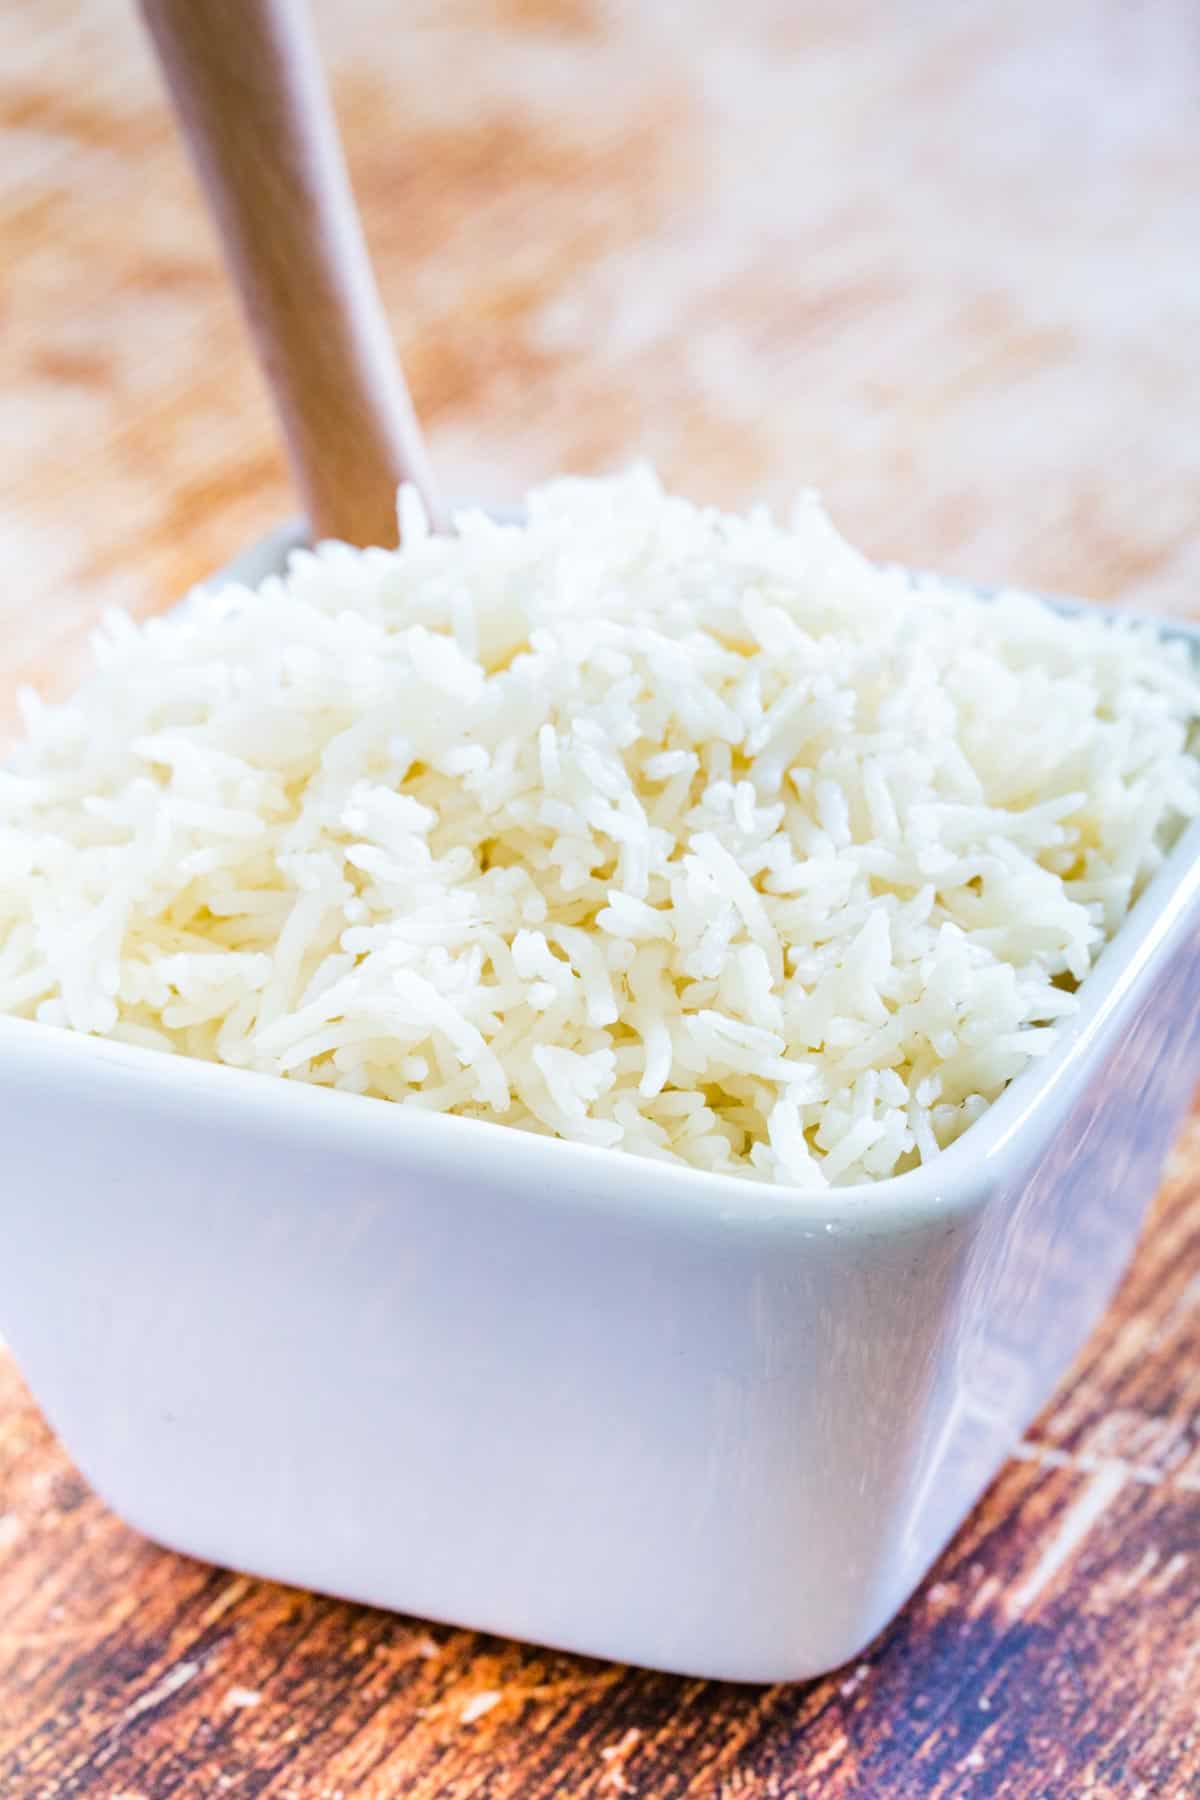 Basmati rice in a white bowl on a wooden countertop.